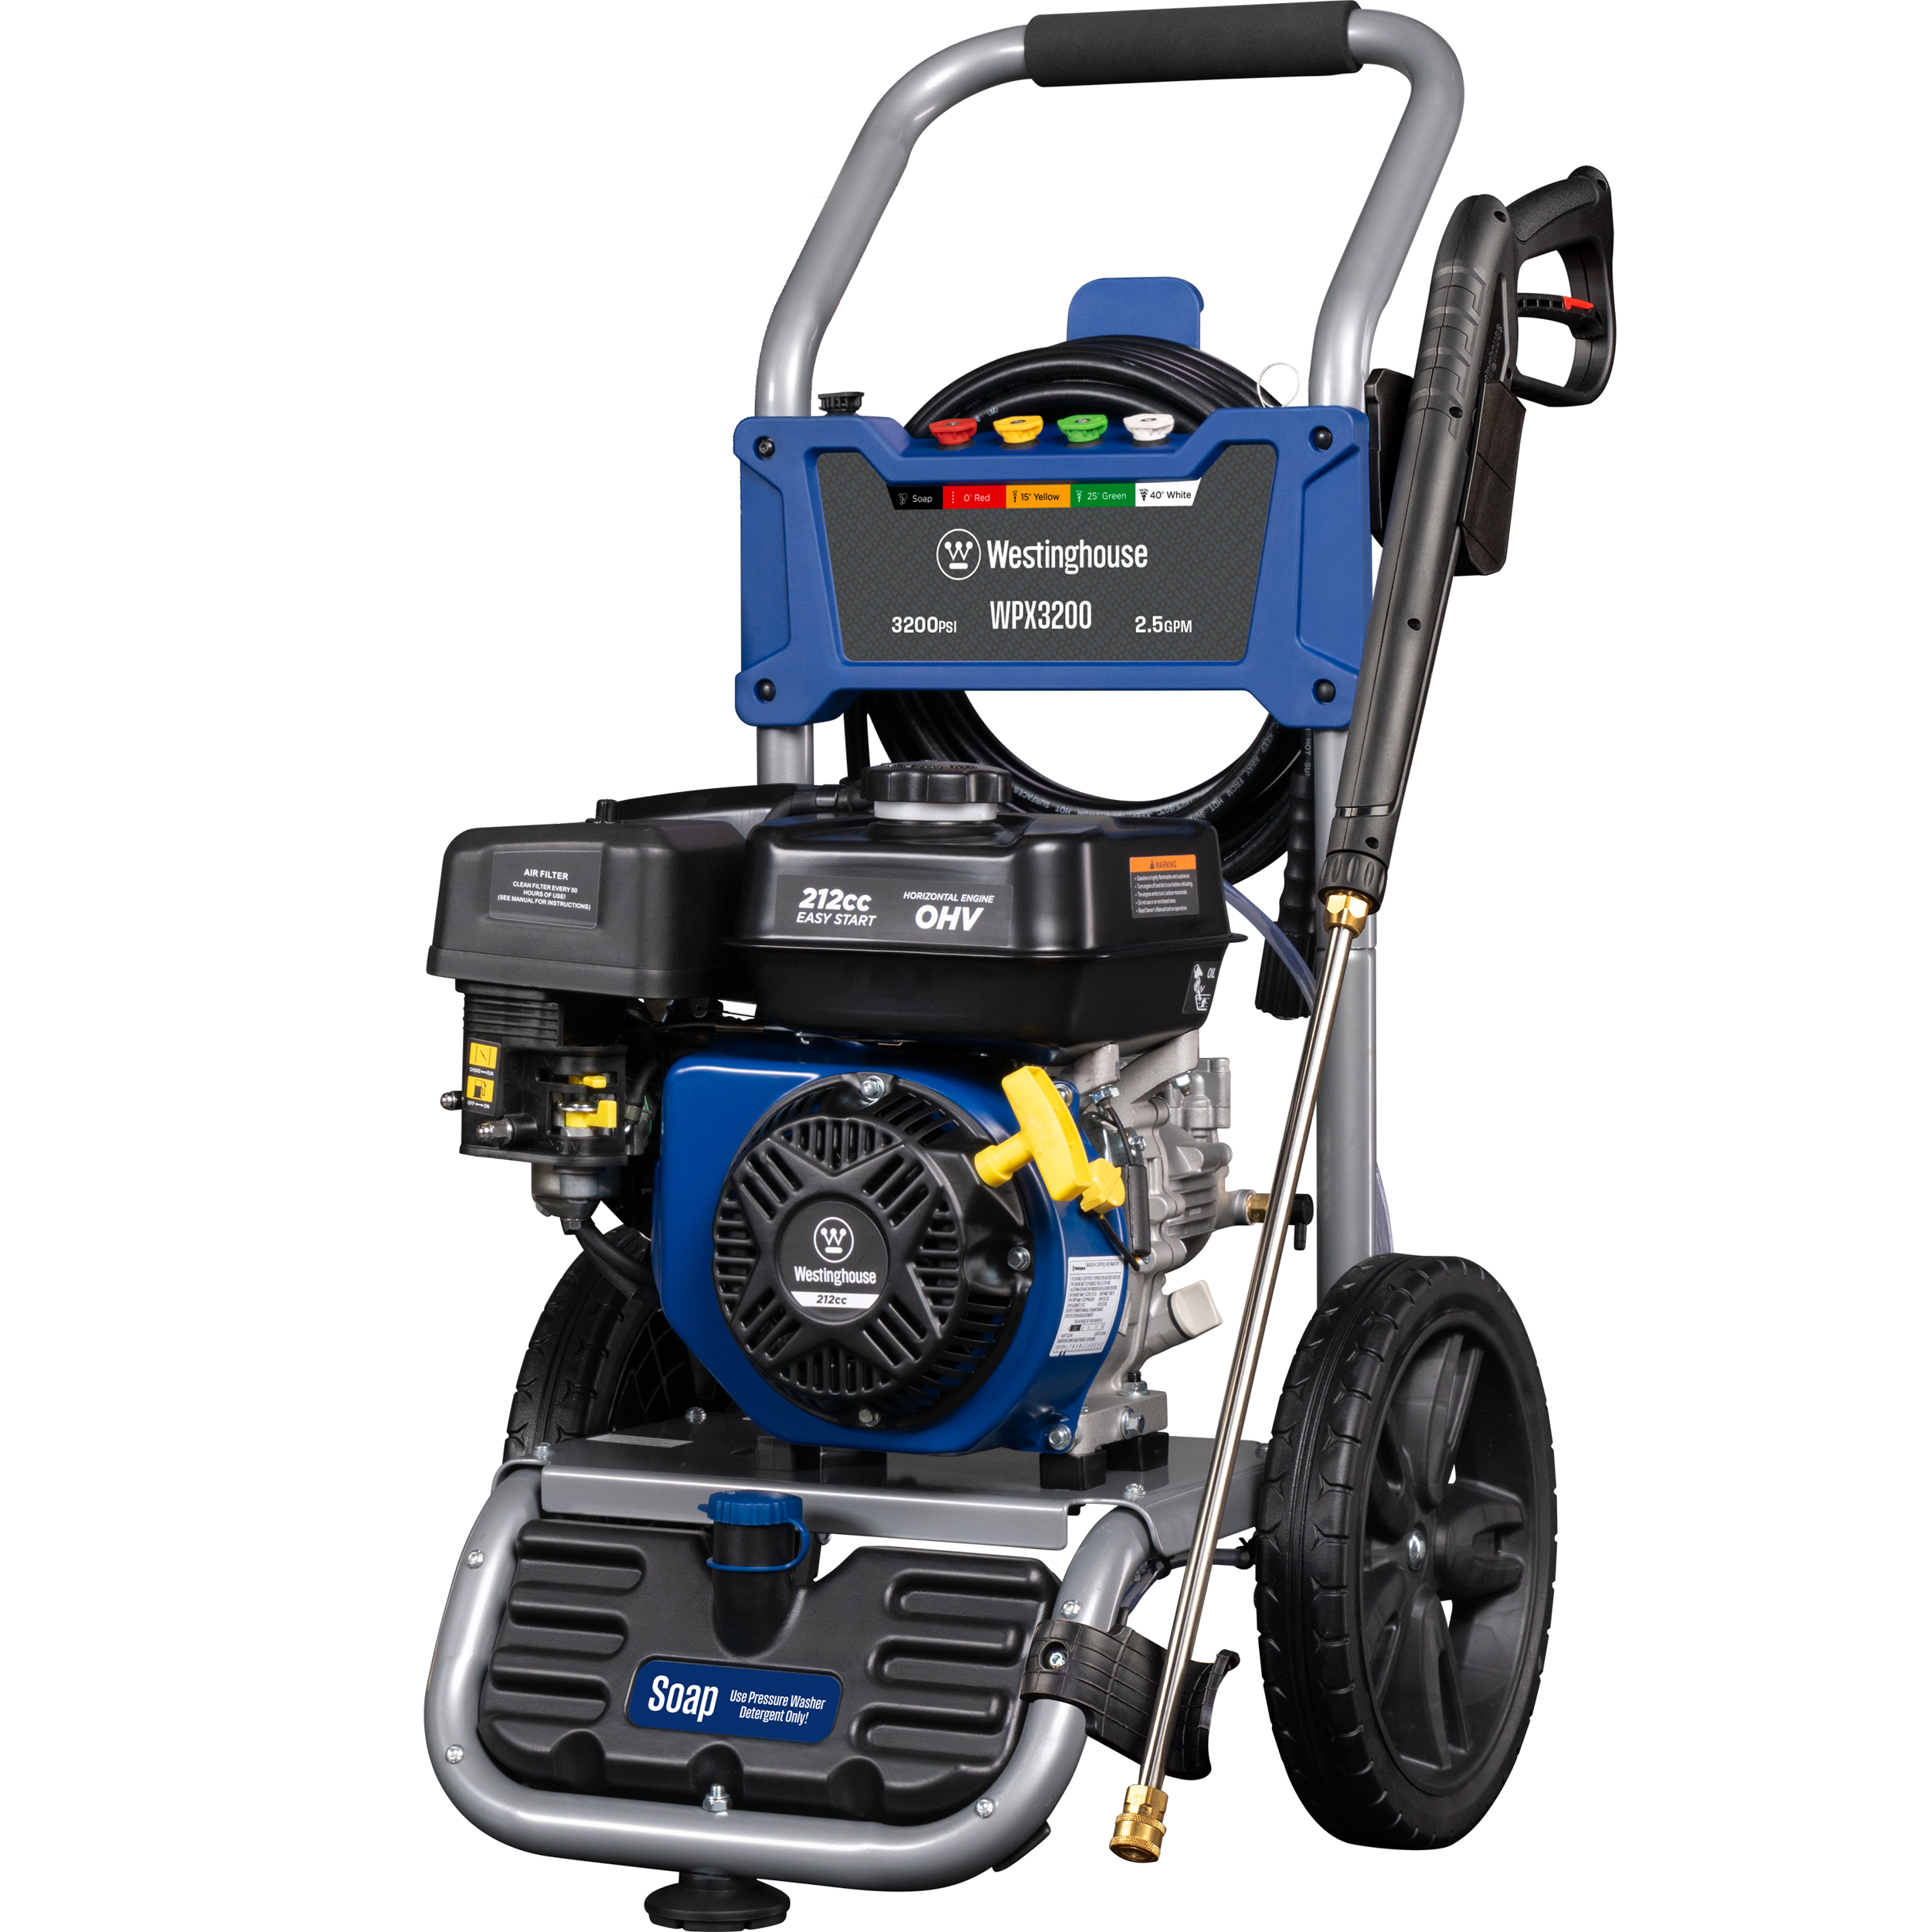 Westinghouse 3200-PSI, 2.5-GPM Gas Pressure Washer with 5 Nozzles & Soap Tank, 63 lbs. - image 10 of 13